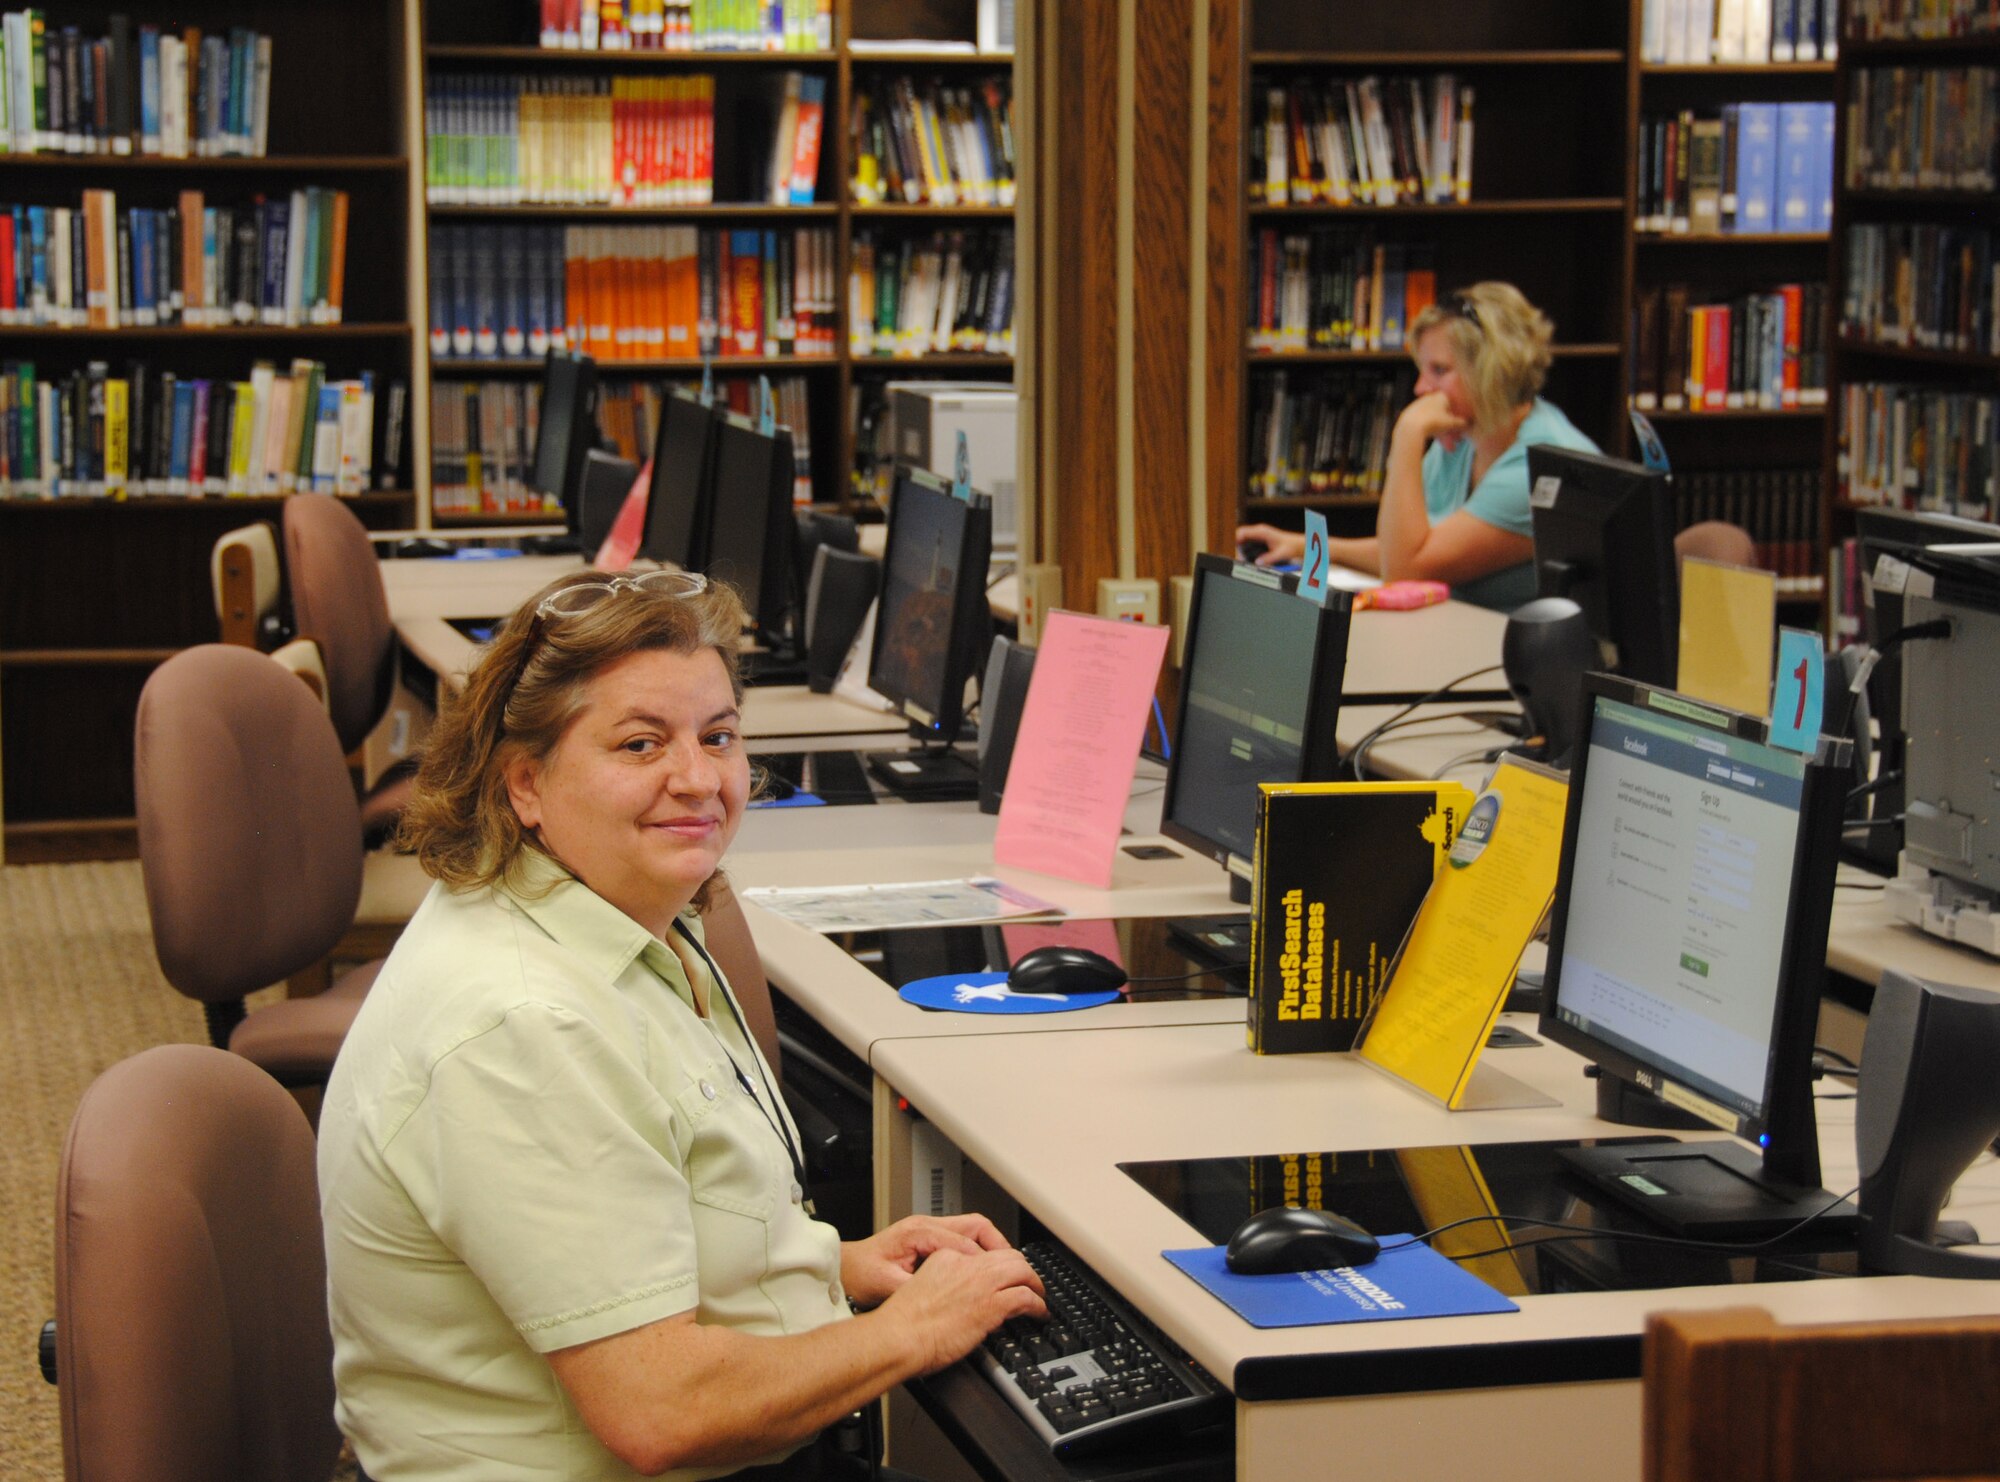 VANCE AIR FORCE BASE, Okla. – Antonietta Pellegrino, a librarian at the Vance AFB Library, logs onto a social media Website June 25 at the Base Library. The hours for the library have been reduced. The library is now open Monday through Thursday, 11 a.m. to 6:30 p.m.; Friday and Saturday, noon to 5 p.m.; and closed Sunday. (U.S. Air Force photo/2nd Lt. Mark Habermeyer)